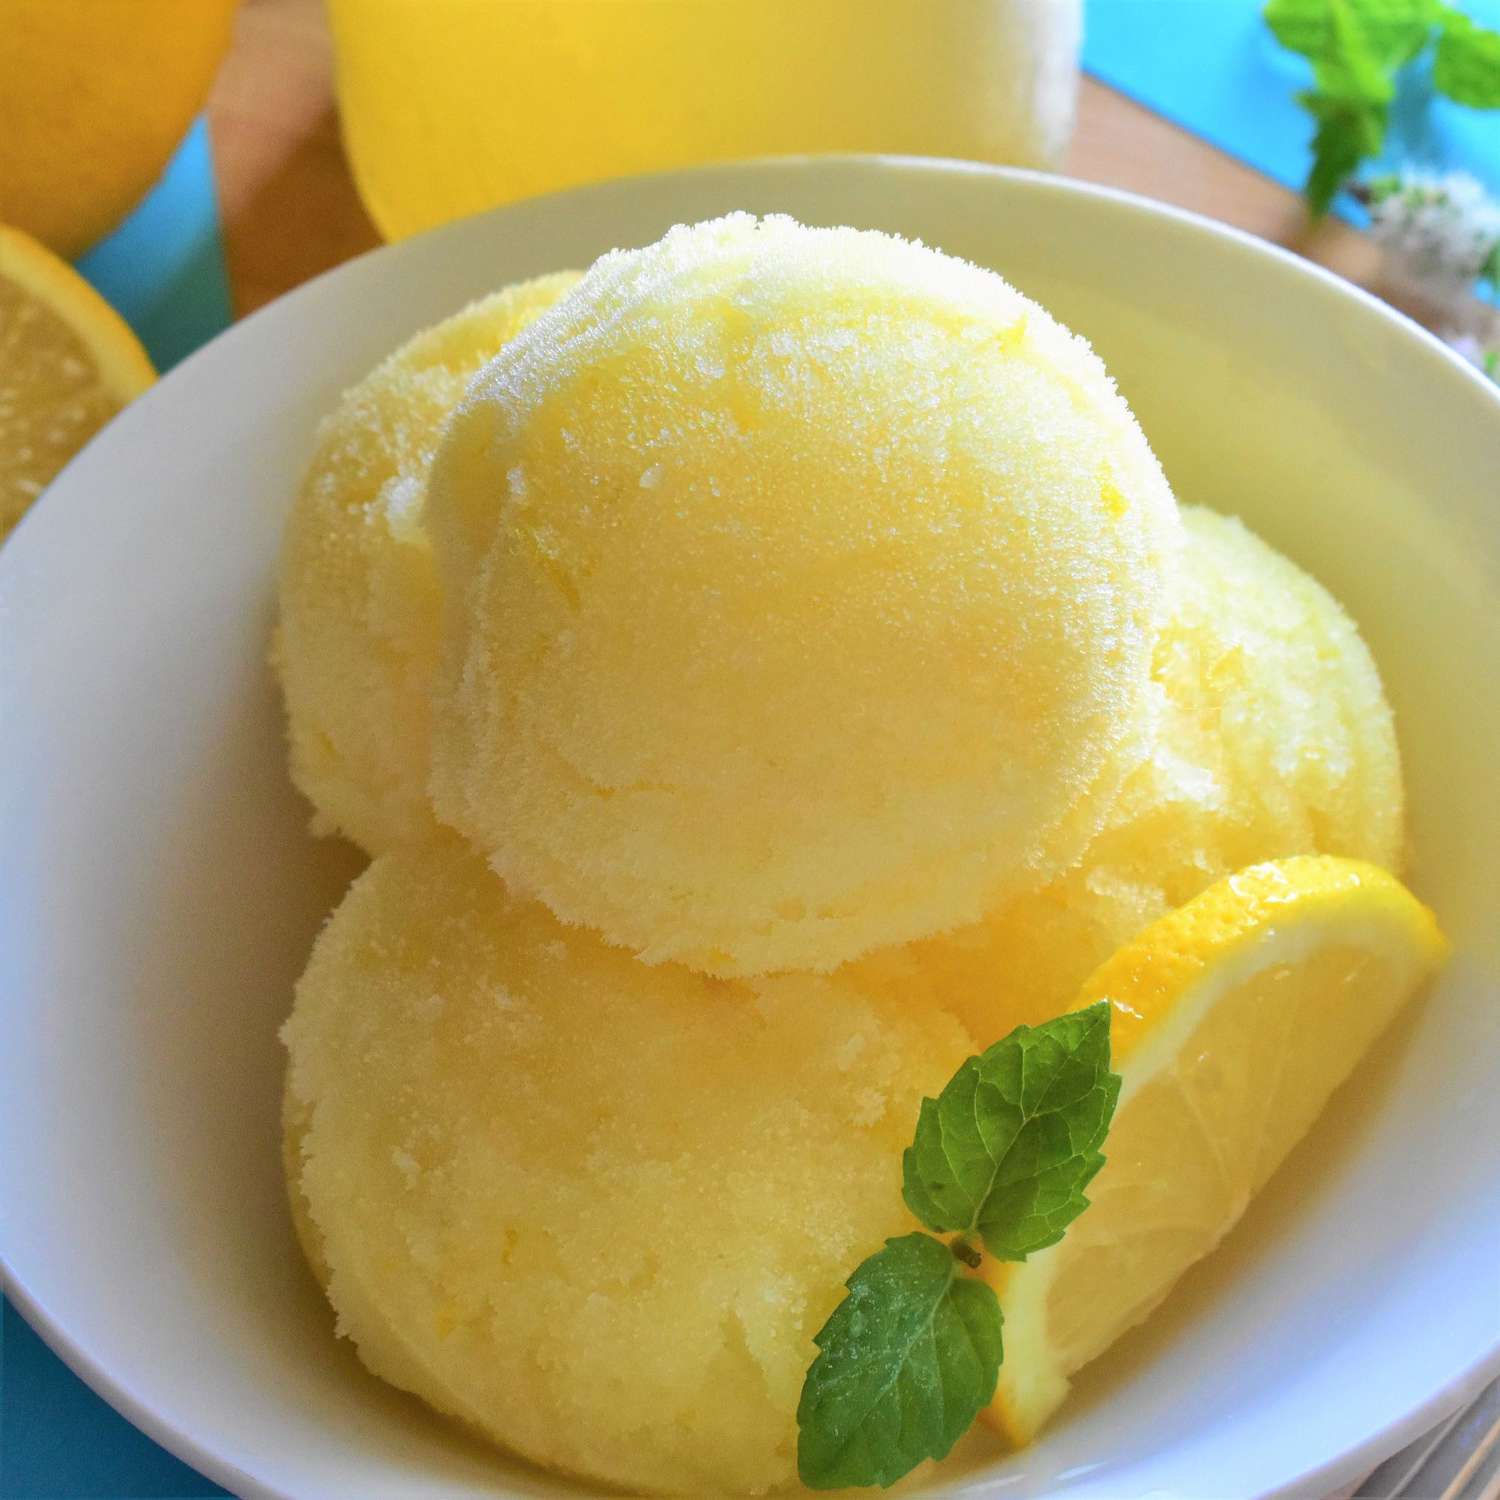 How To Make Lemon Sorbet Without An Ice Cream Maker